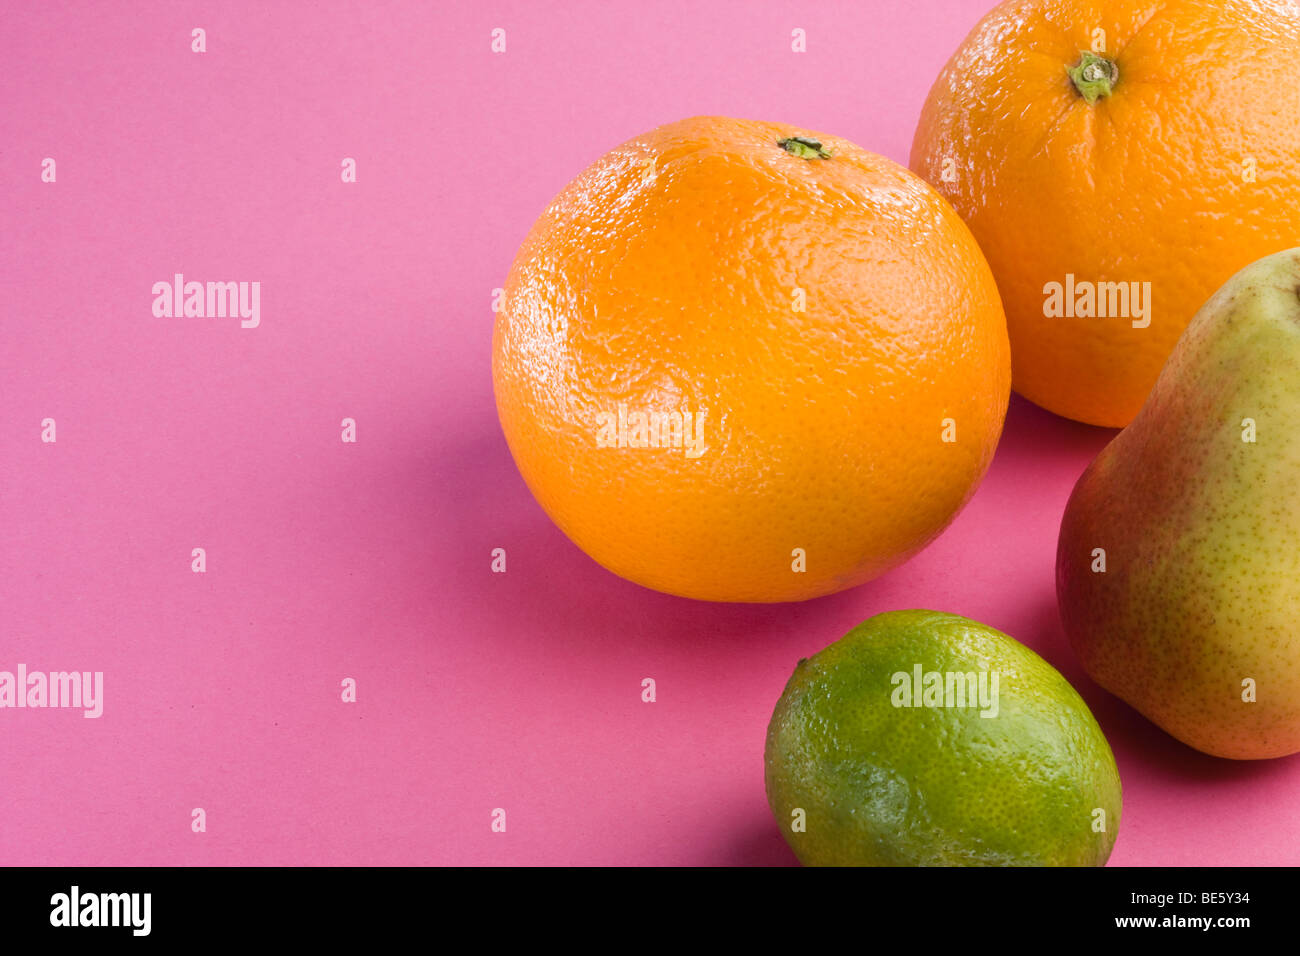 Oranges, pear, lime Stock Photo